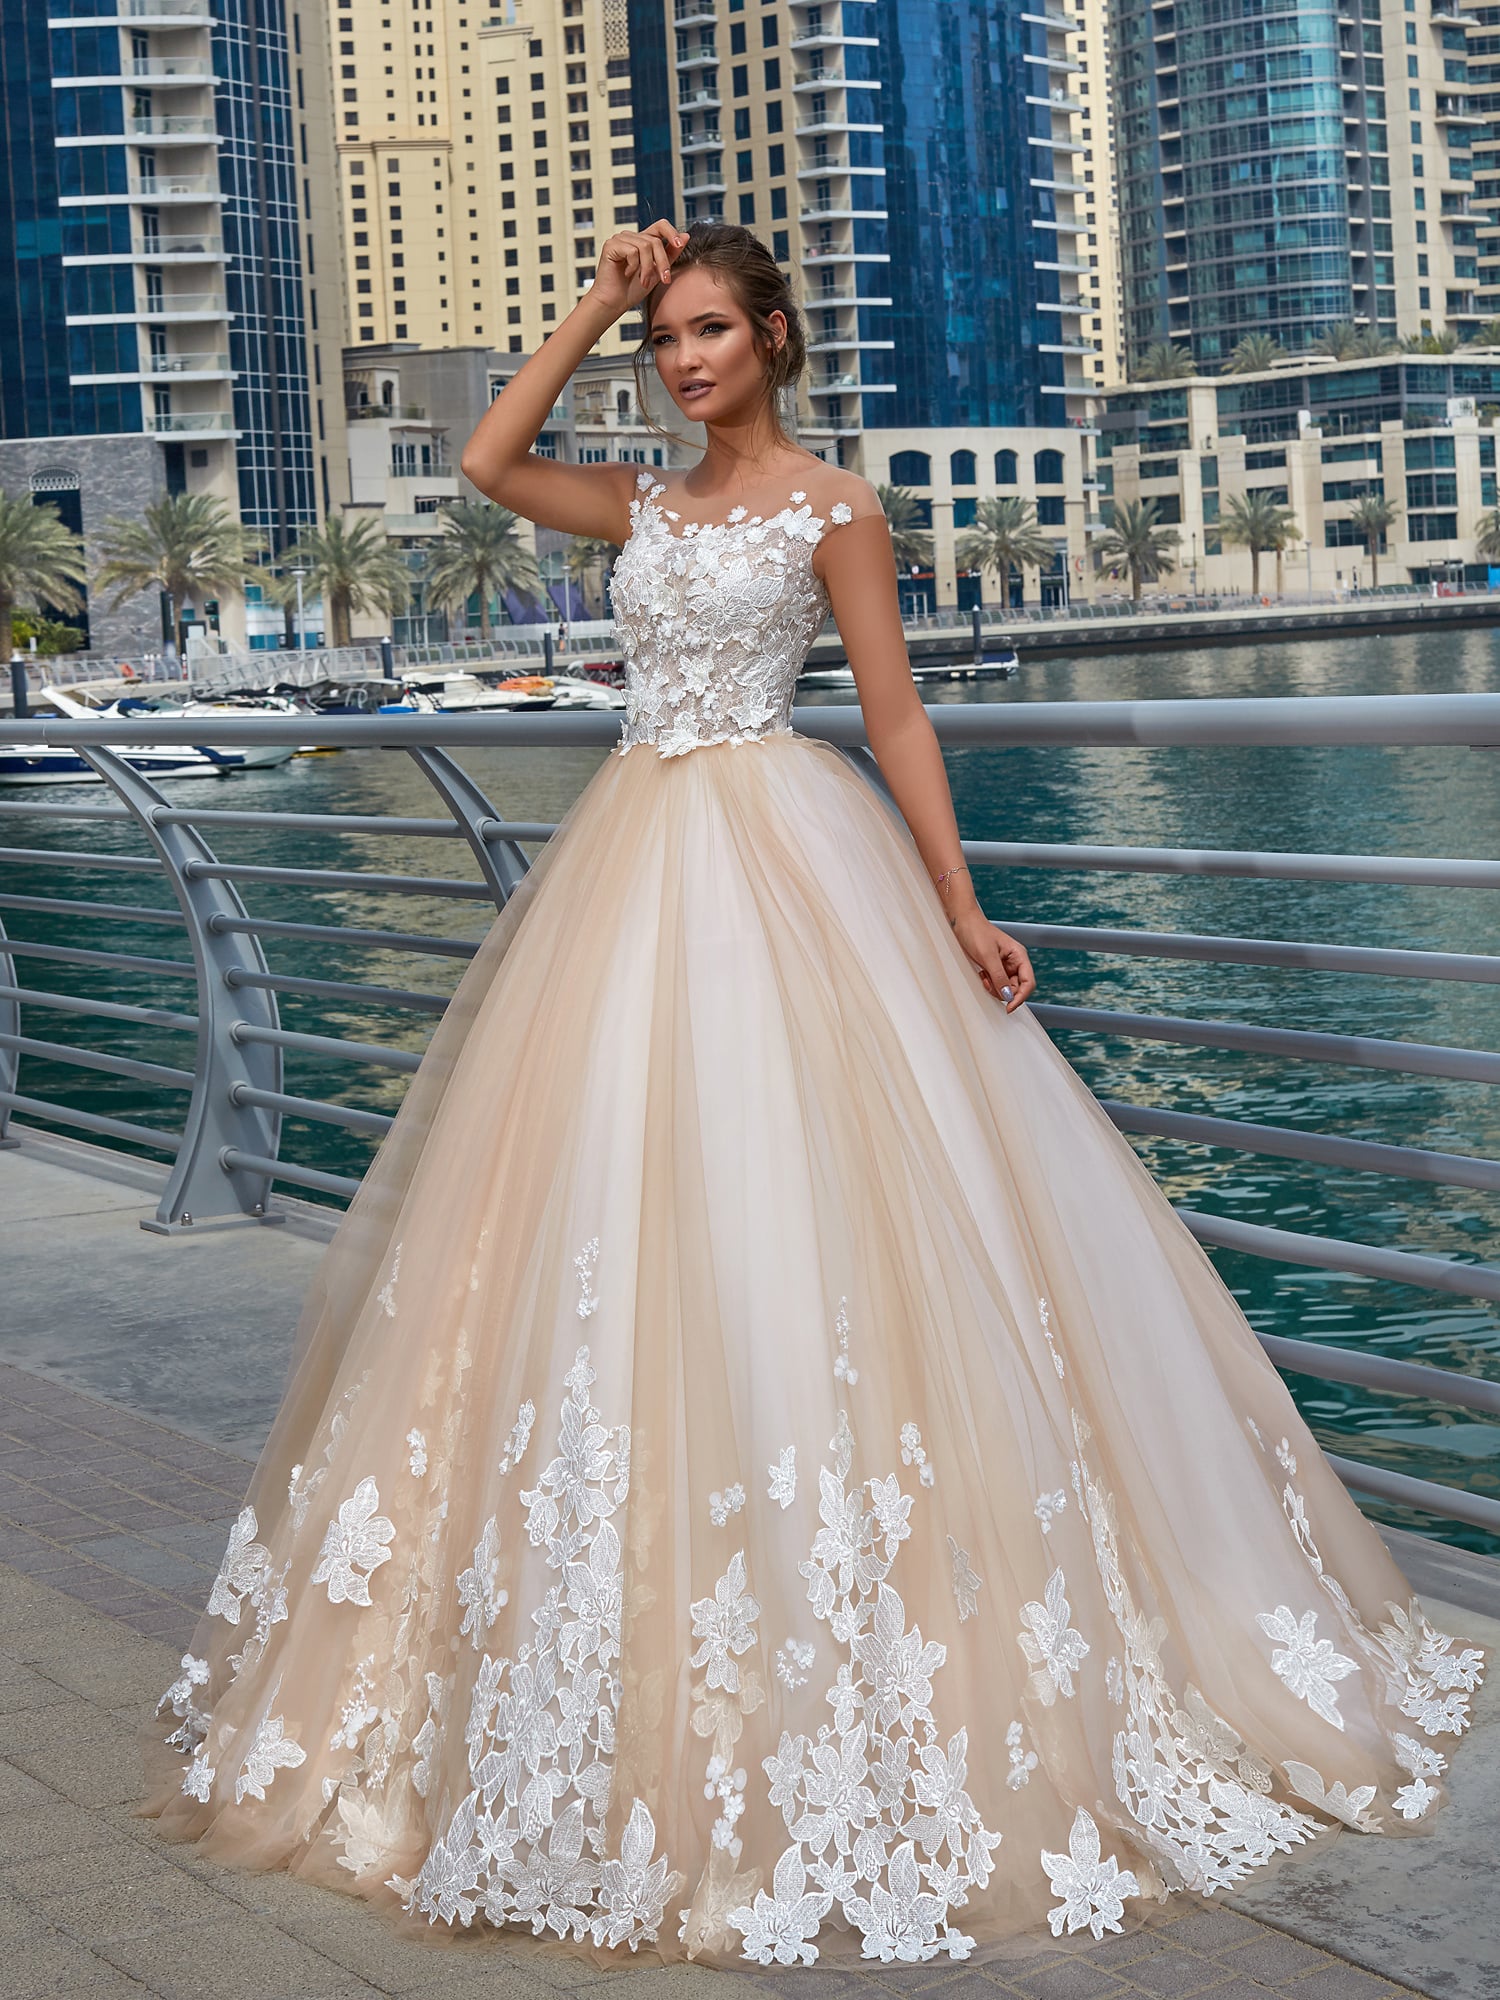 Great Champagne Wedding Dresses of the decade Don t miss out 